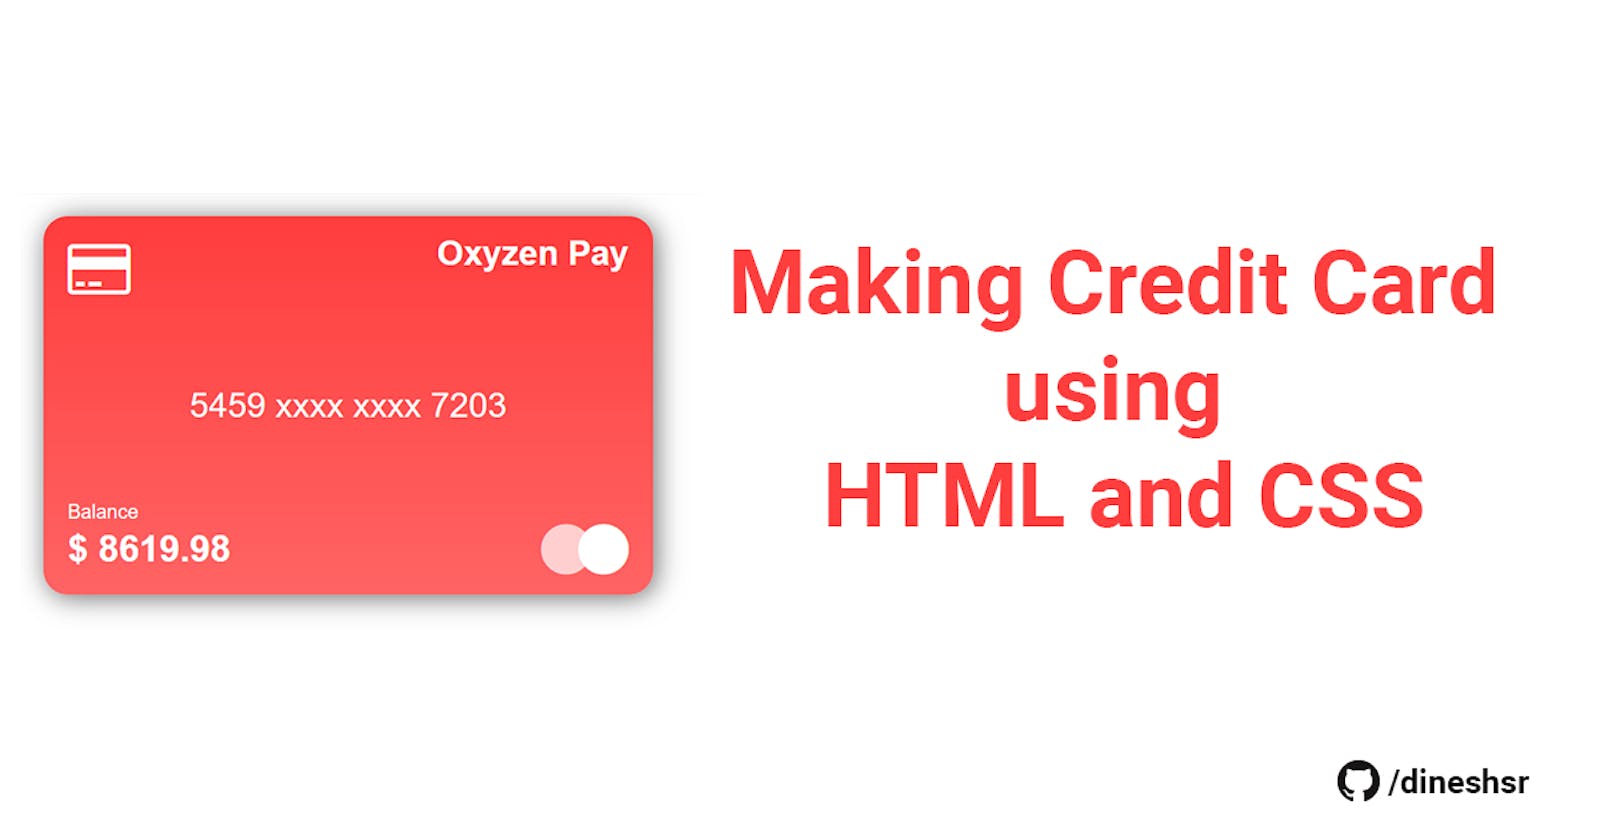 Making Credit Card using HTML and CSS